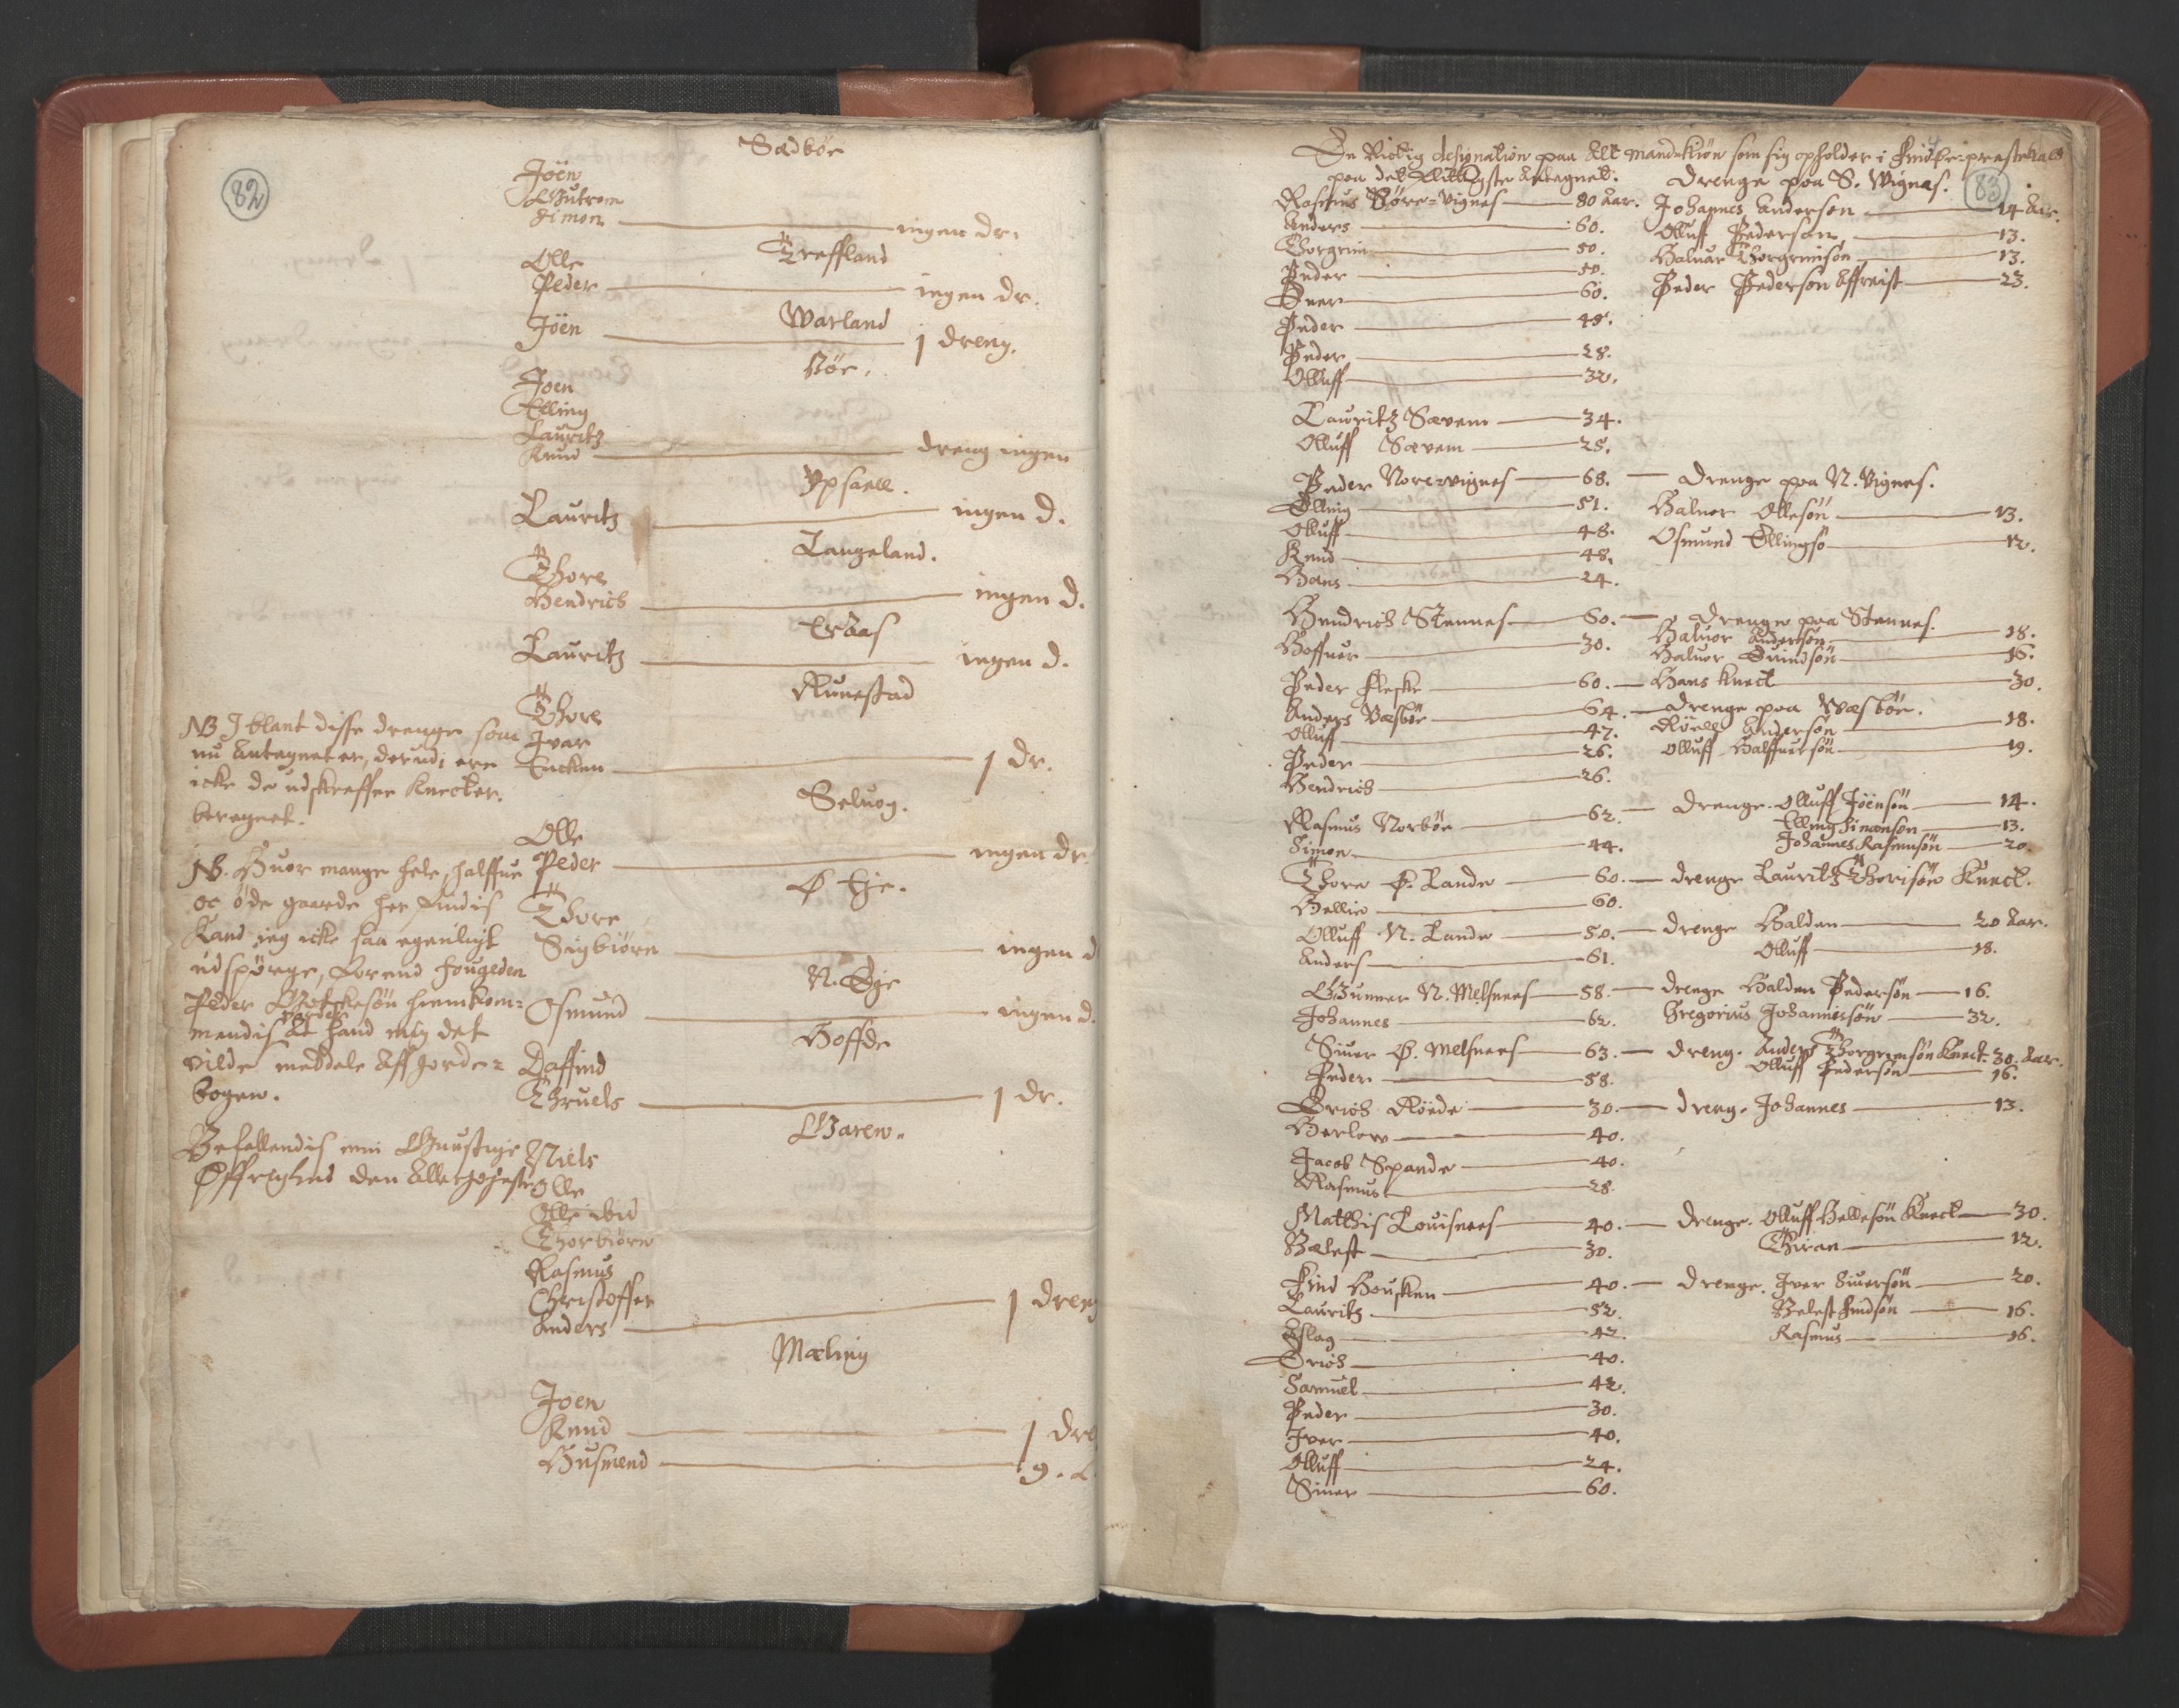 RA, Vicar's Census 1664-1666, no. 18: Stavanger deanery and Karmsund deanery, 1664-1666, p. 82-83